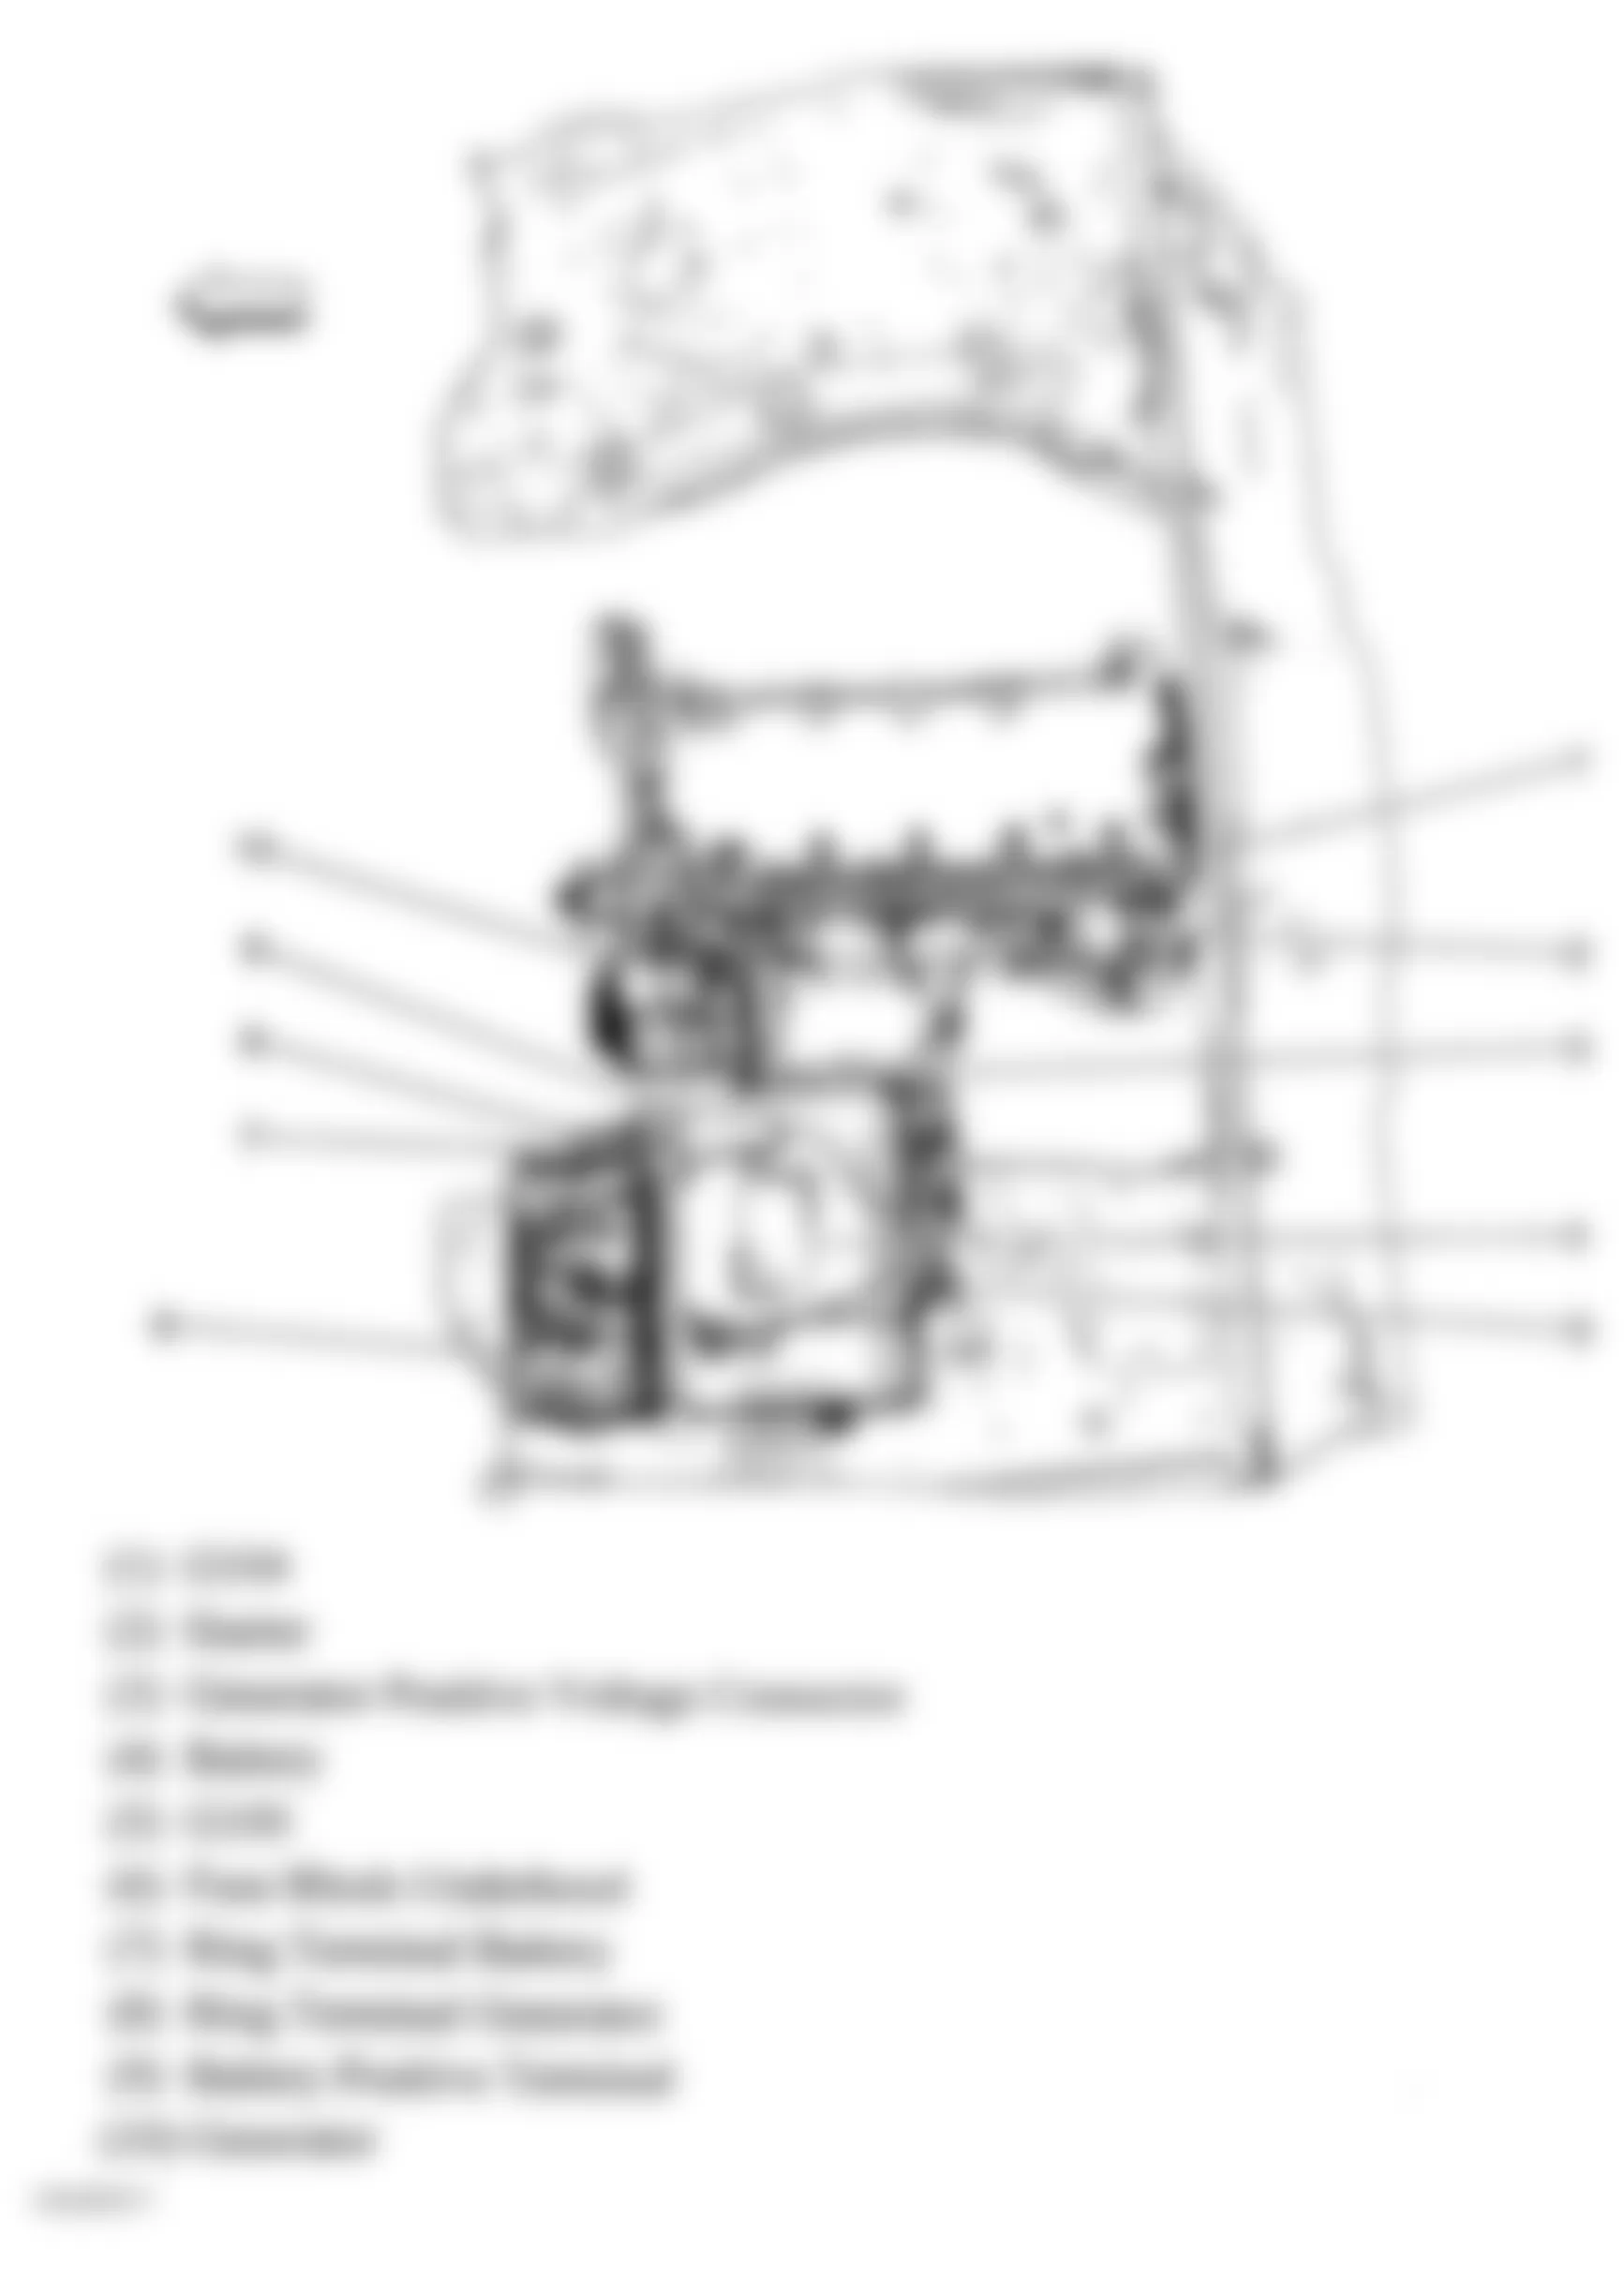 Chevrolet Colorado 2005 - Component Locations -  Engine Compartment (Top View)